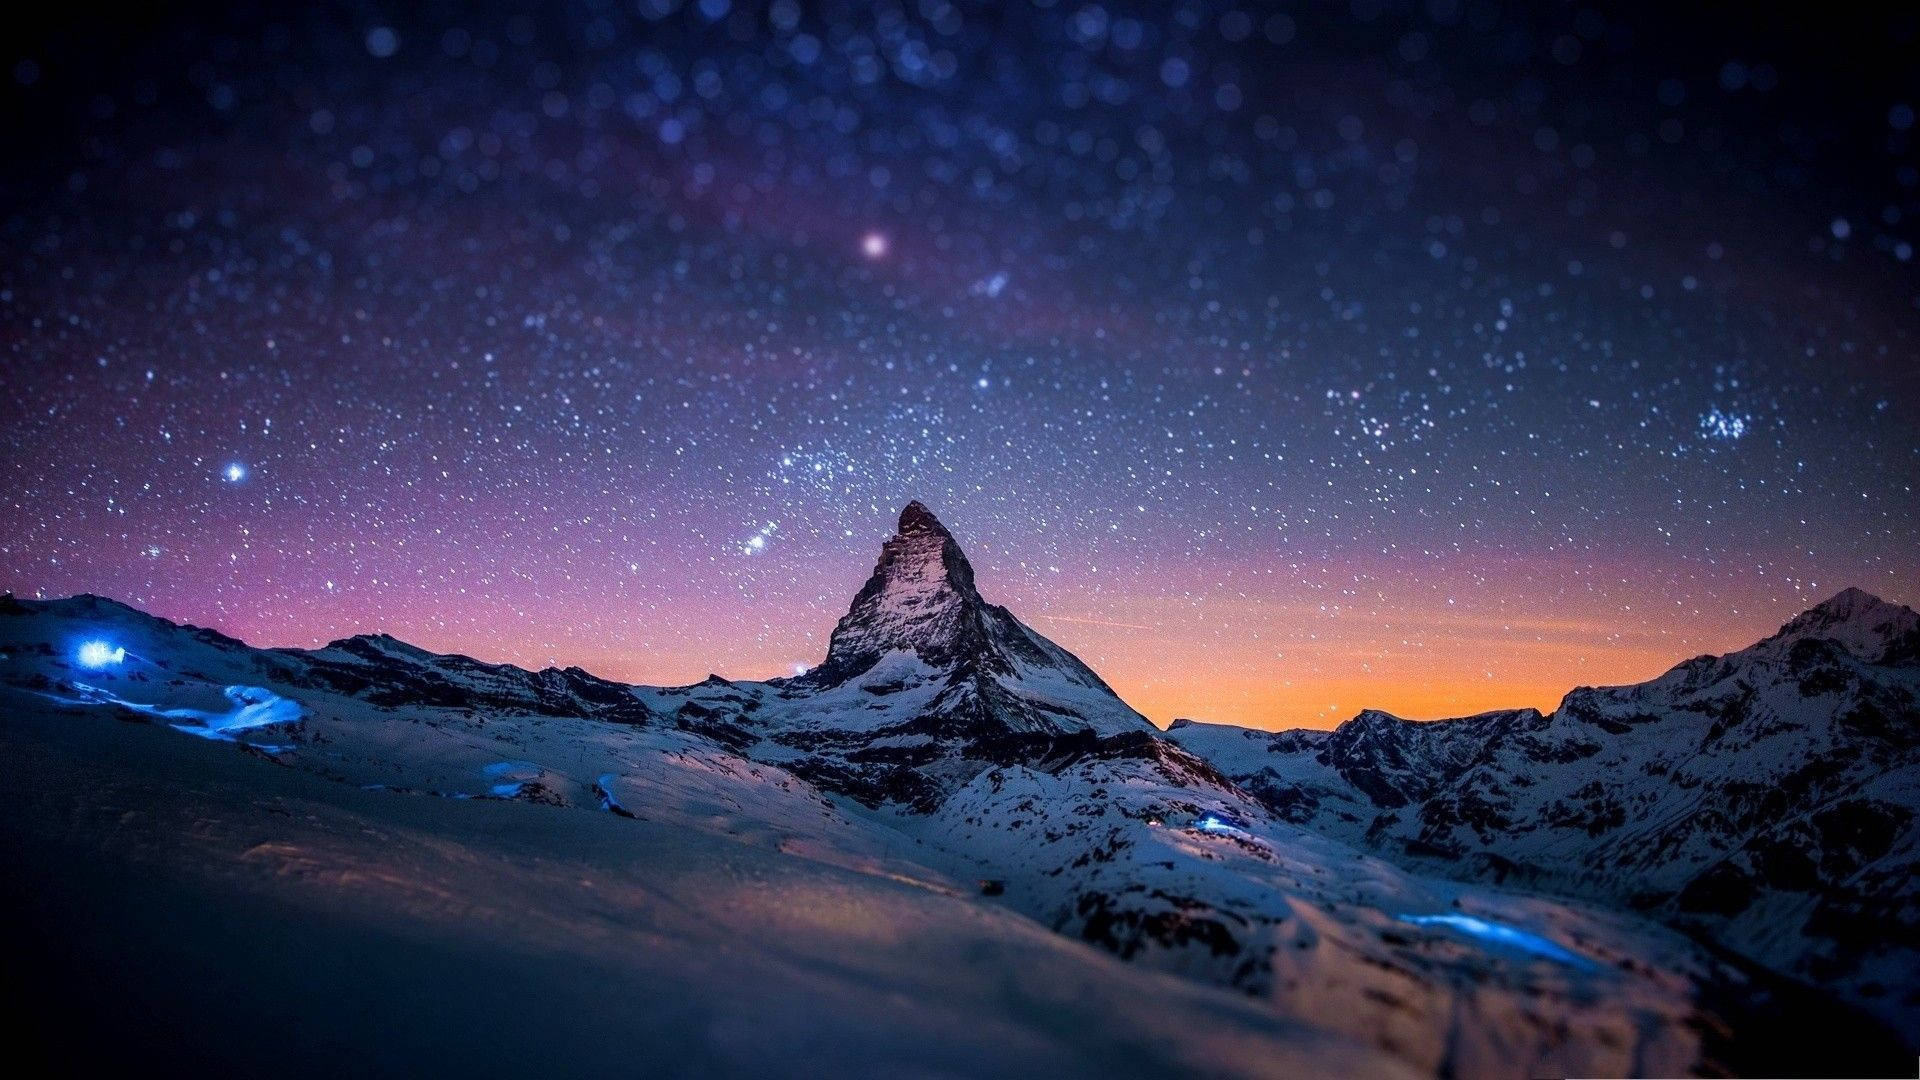 Windows Winter On Mountains And Starry Sky Background